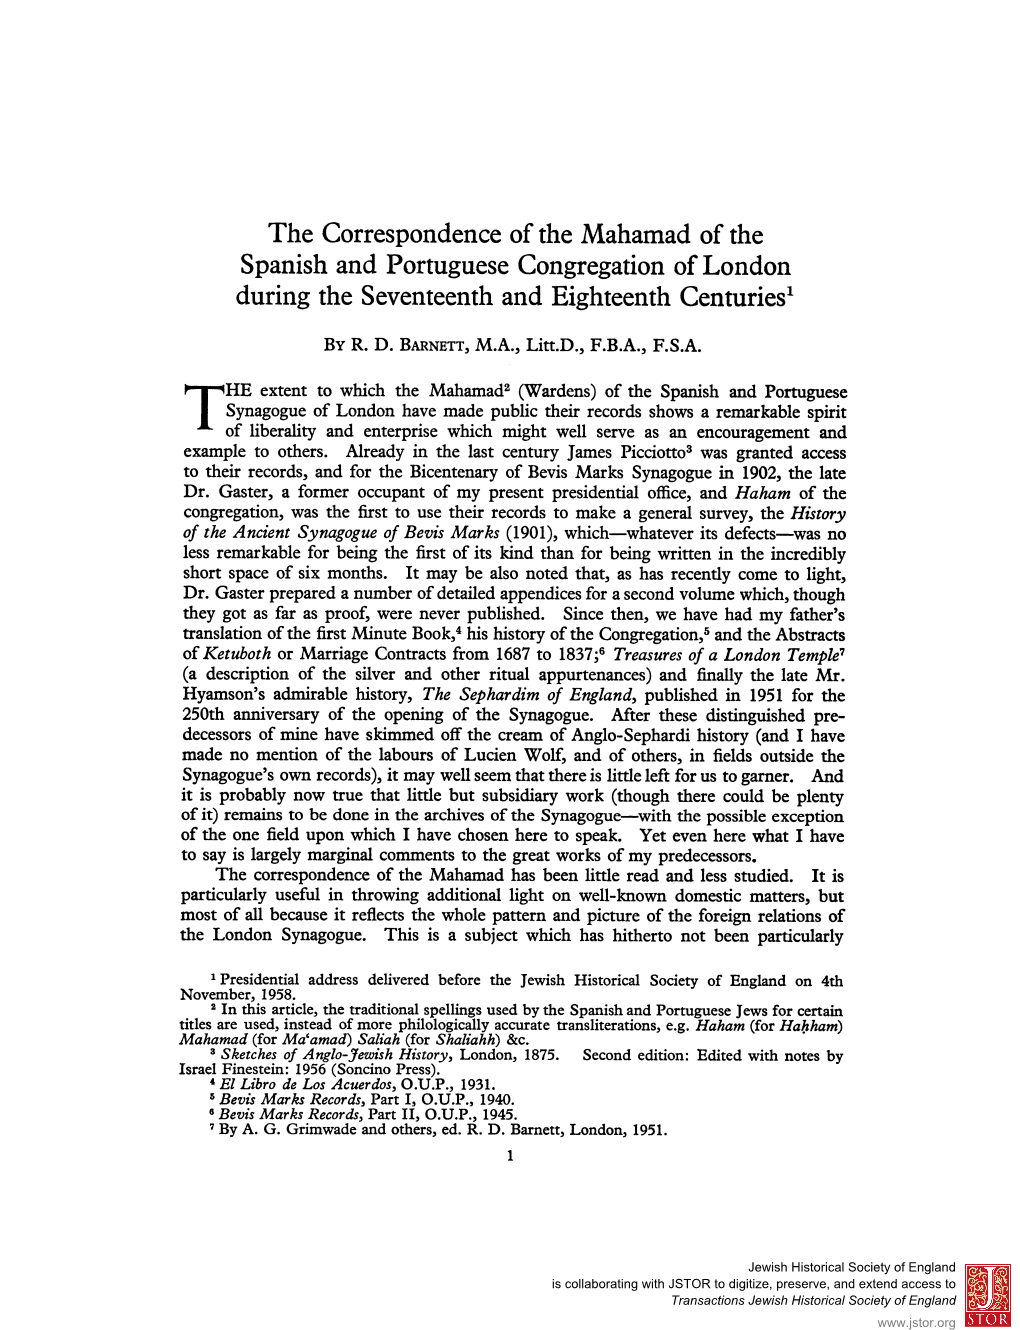 The Correspondence of the Mahamad of the Spanish and Portuguese